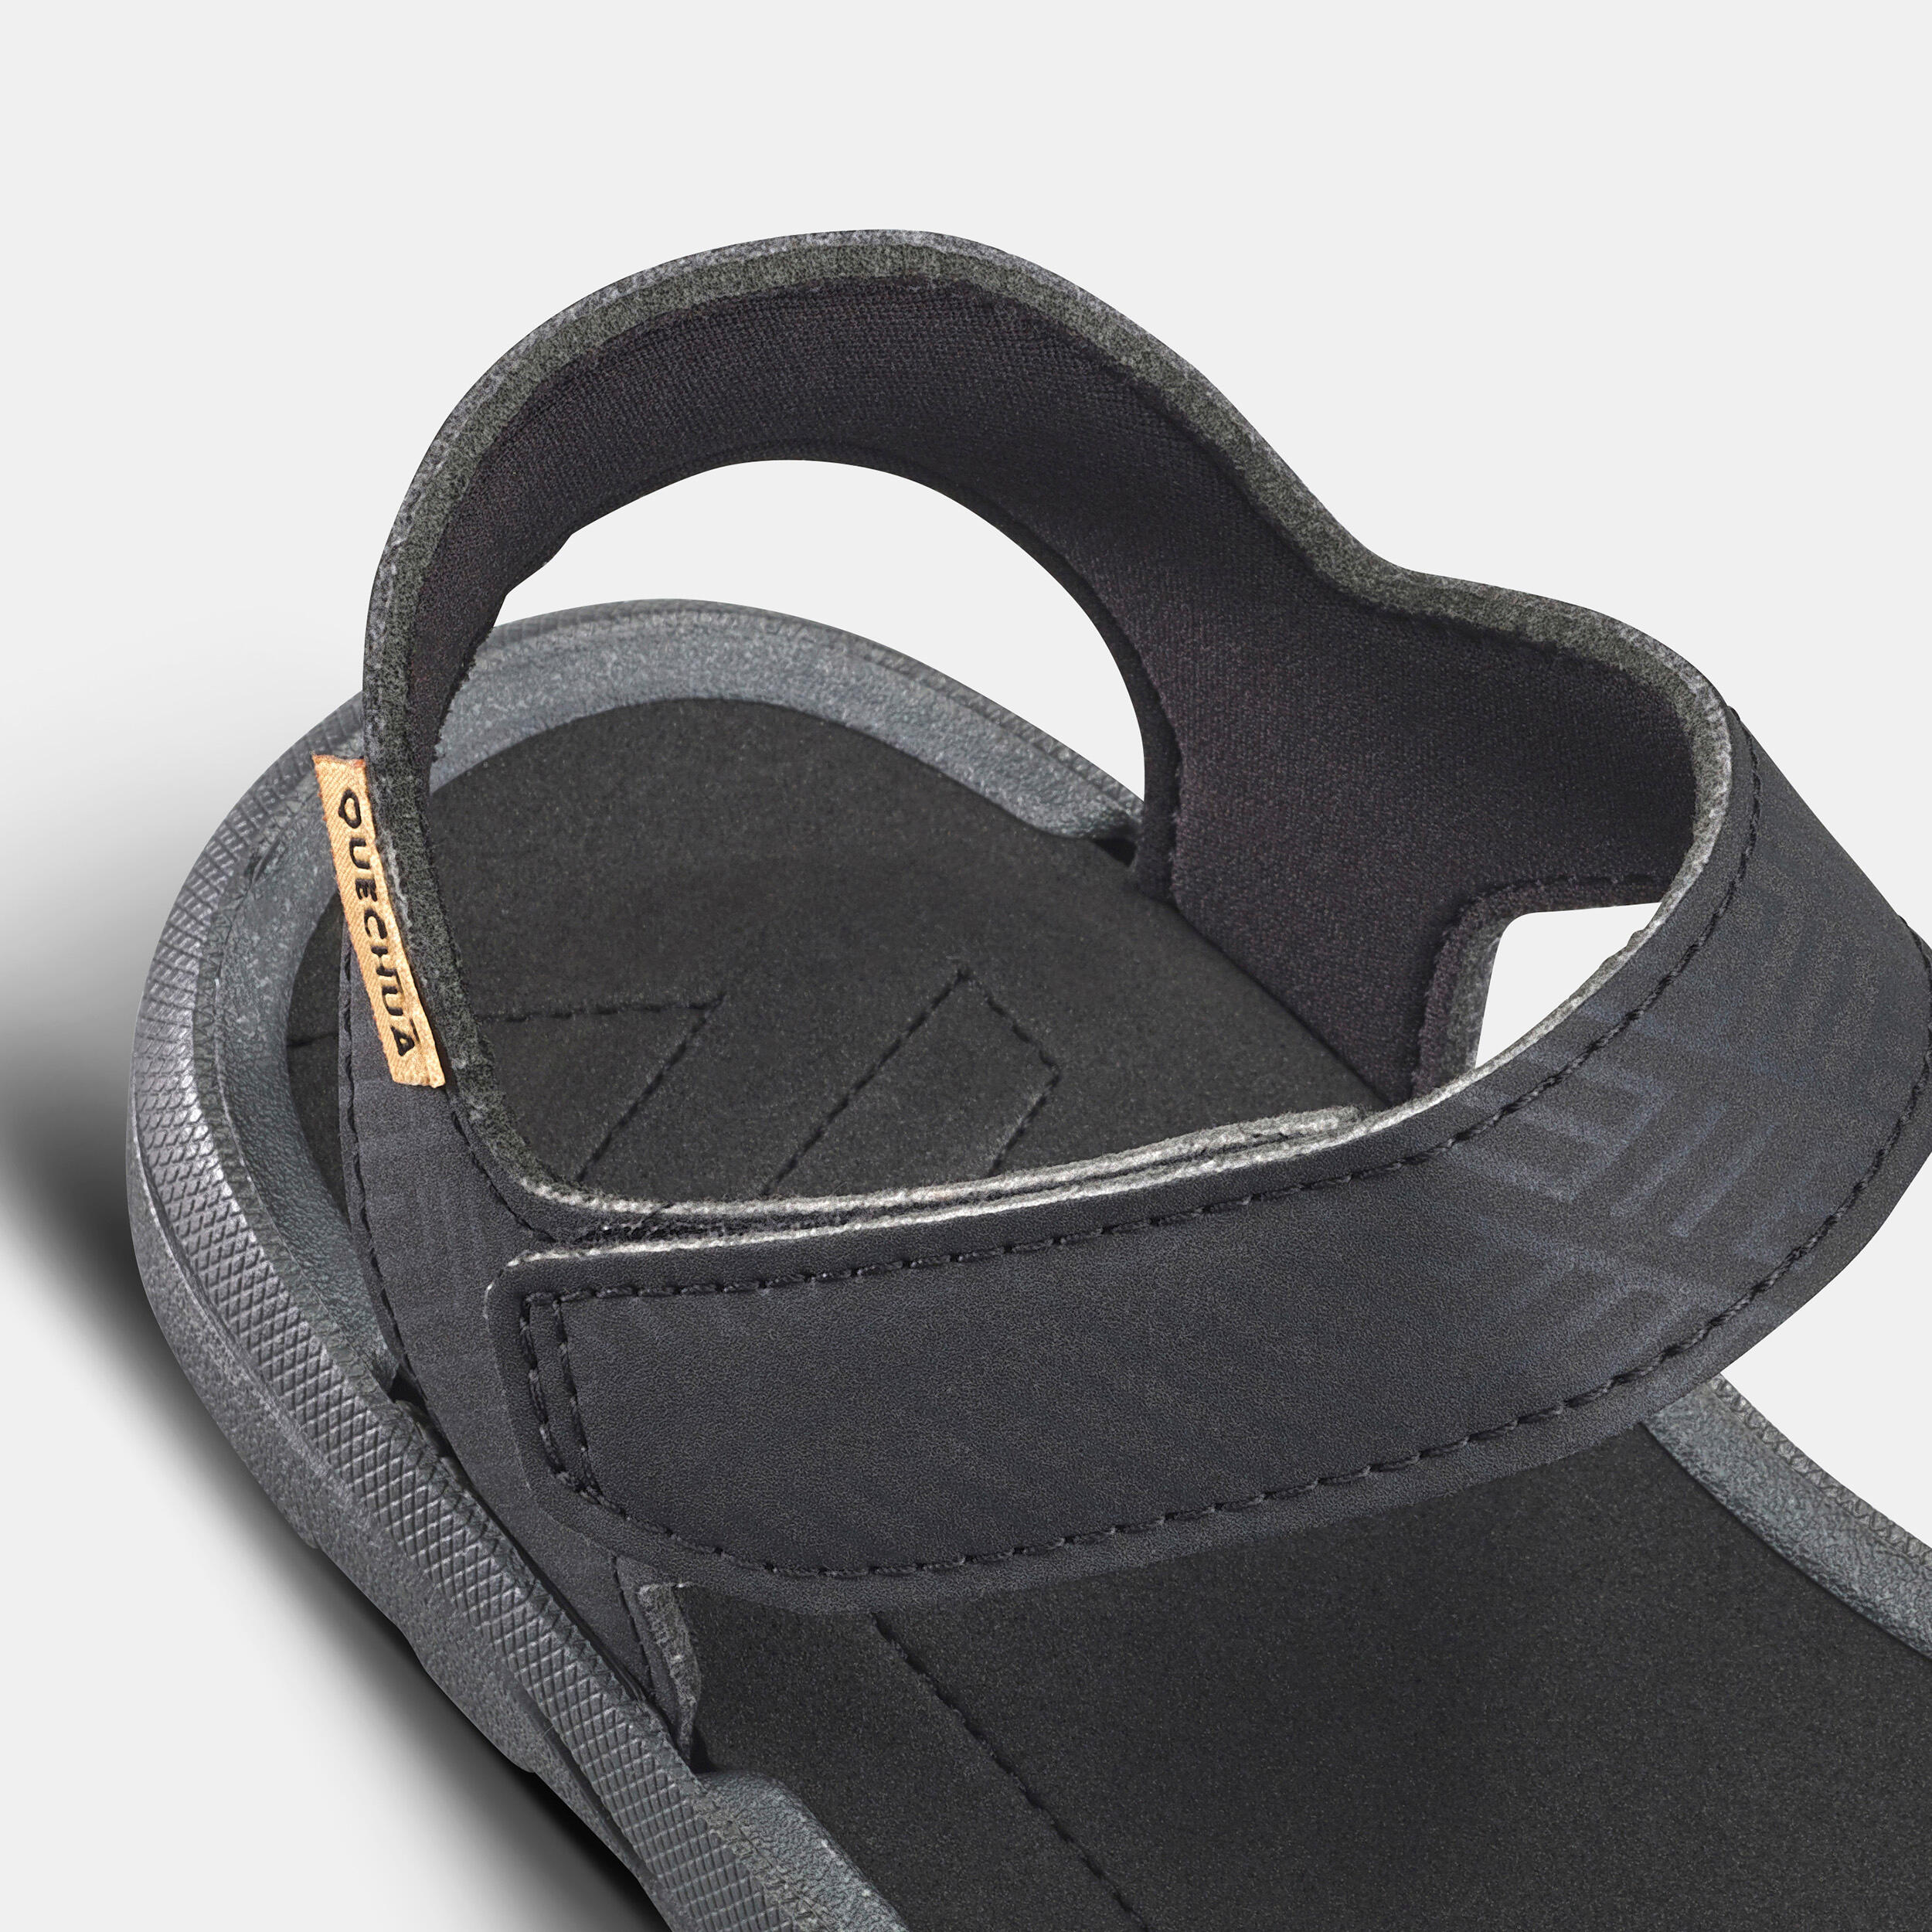 Women’s Post-Hiking Sandals Ecocamp 6/9